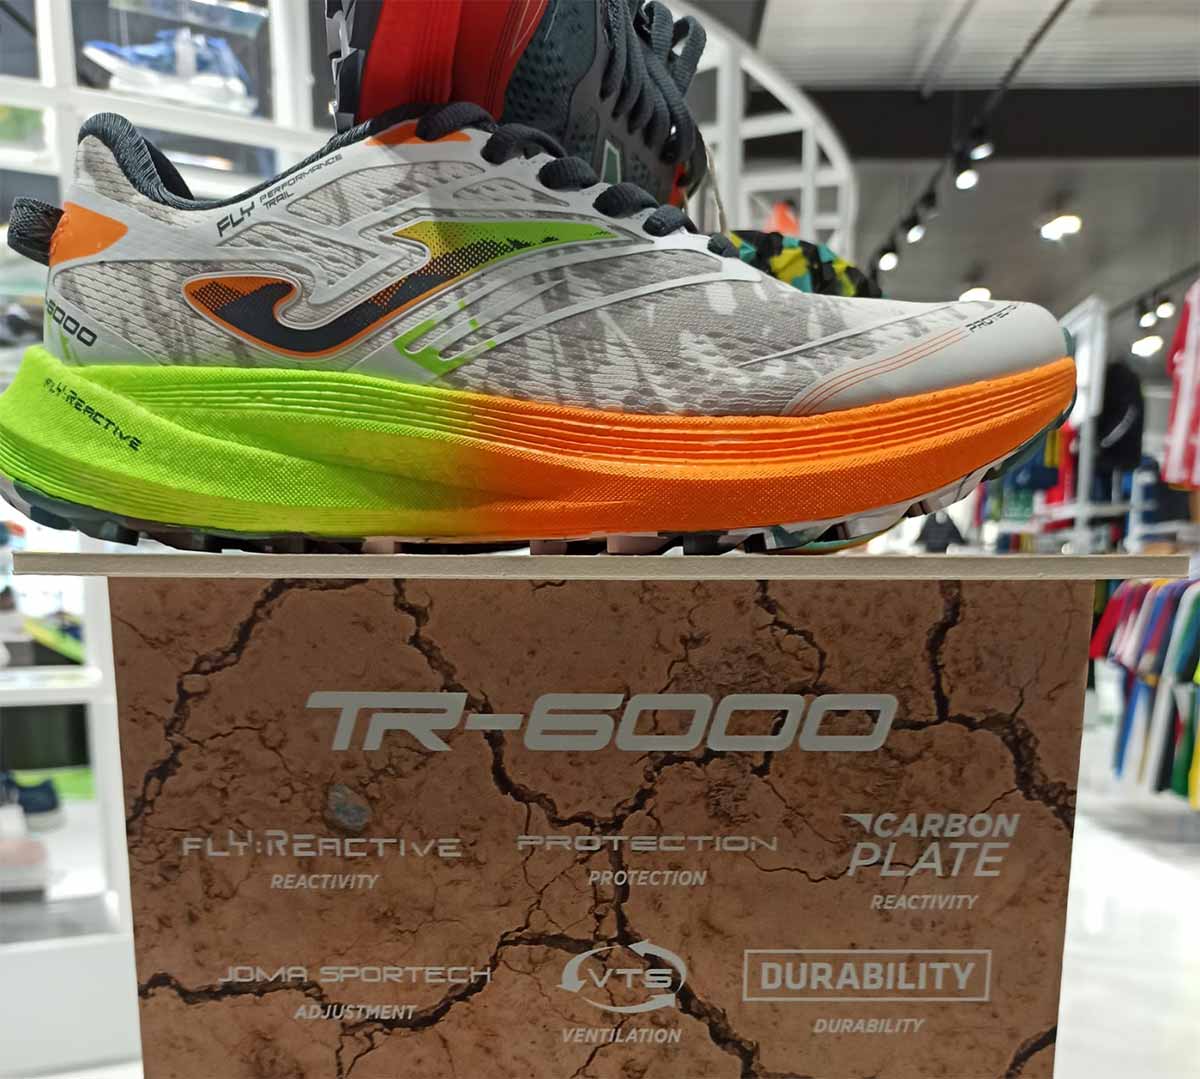 Trail runner profile for which the Joma TR-6000 is intended